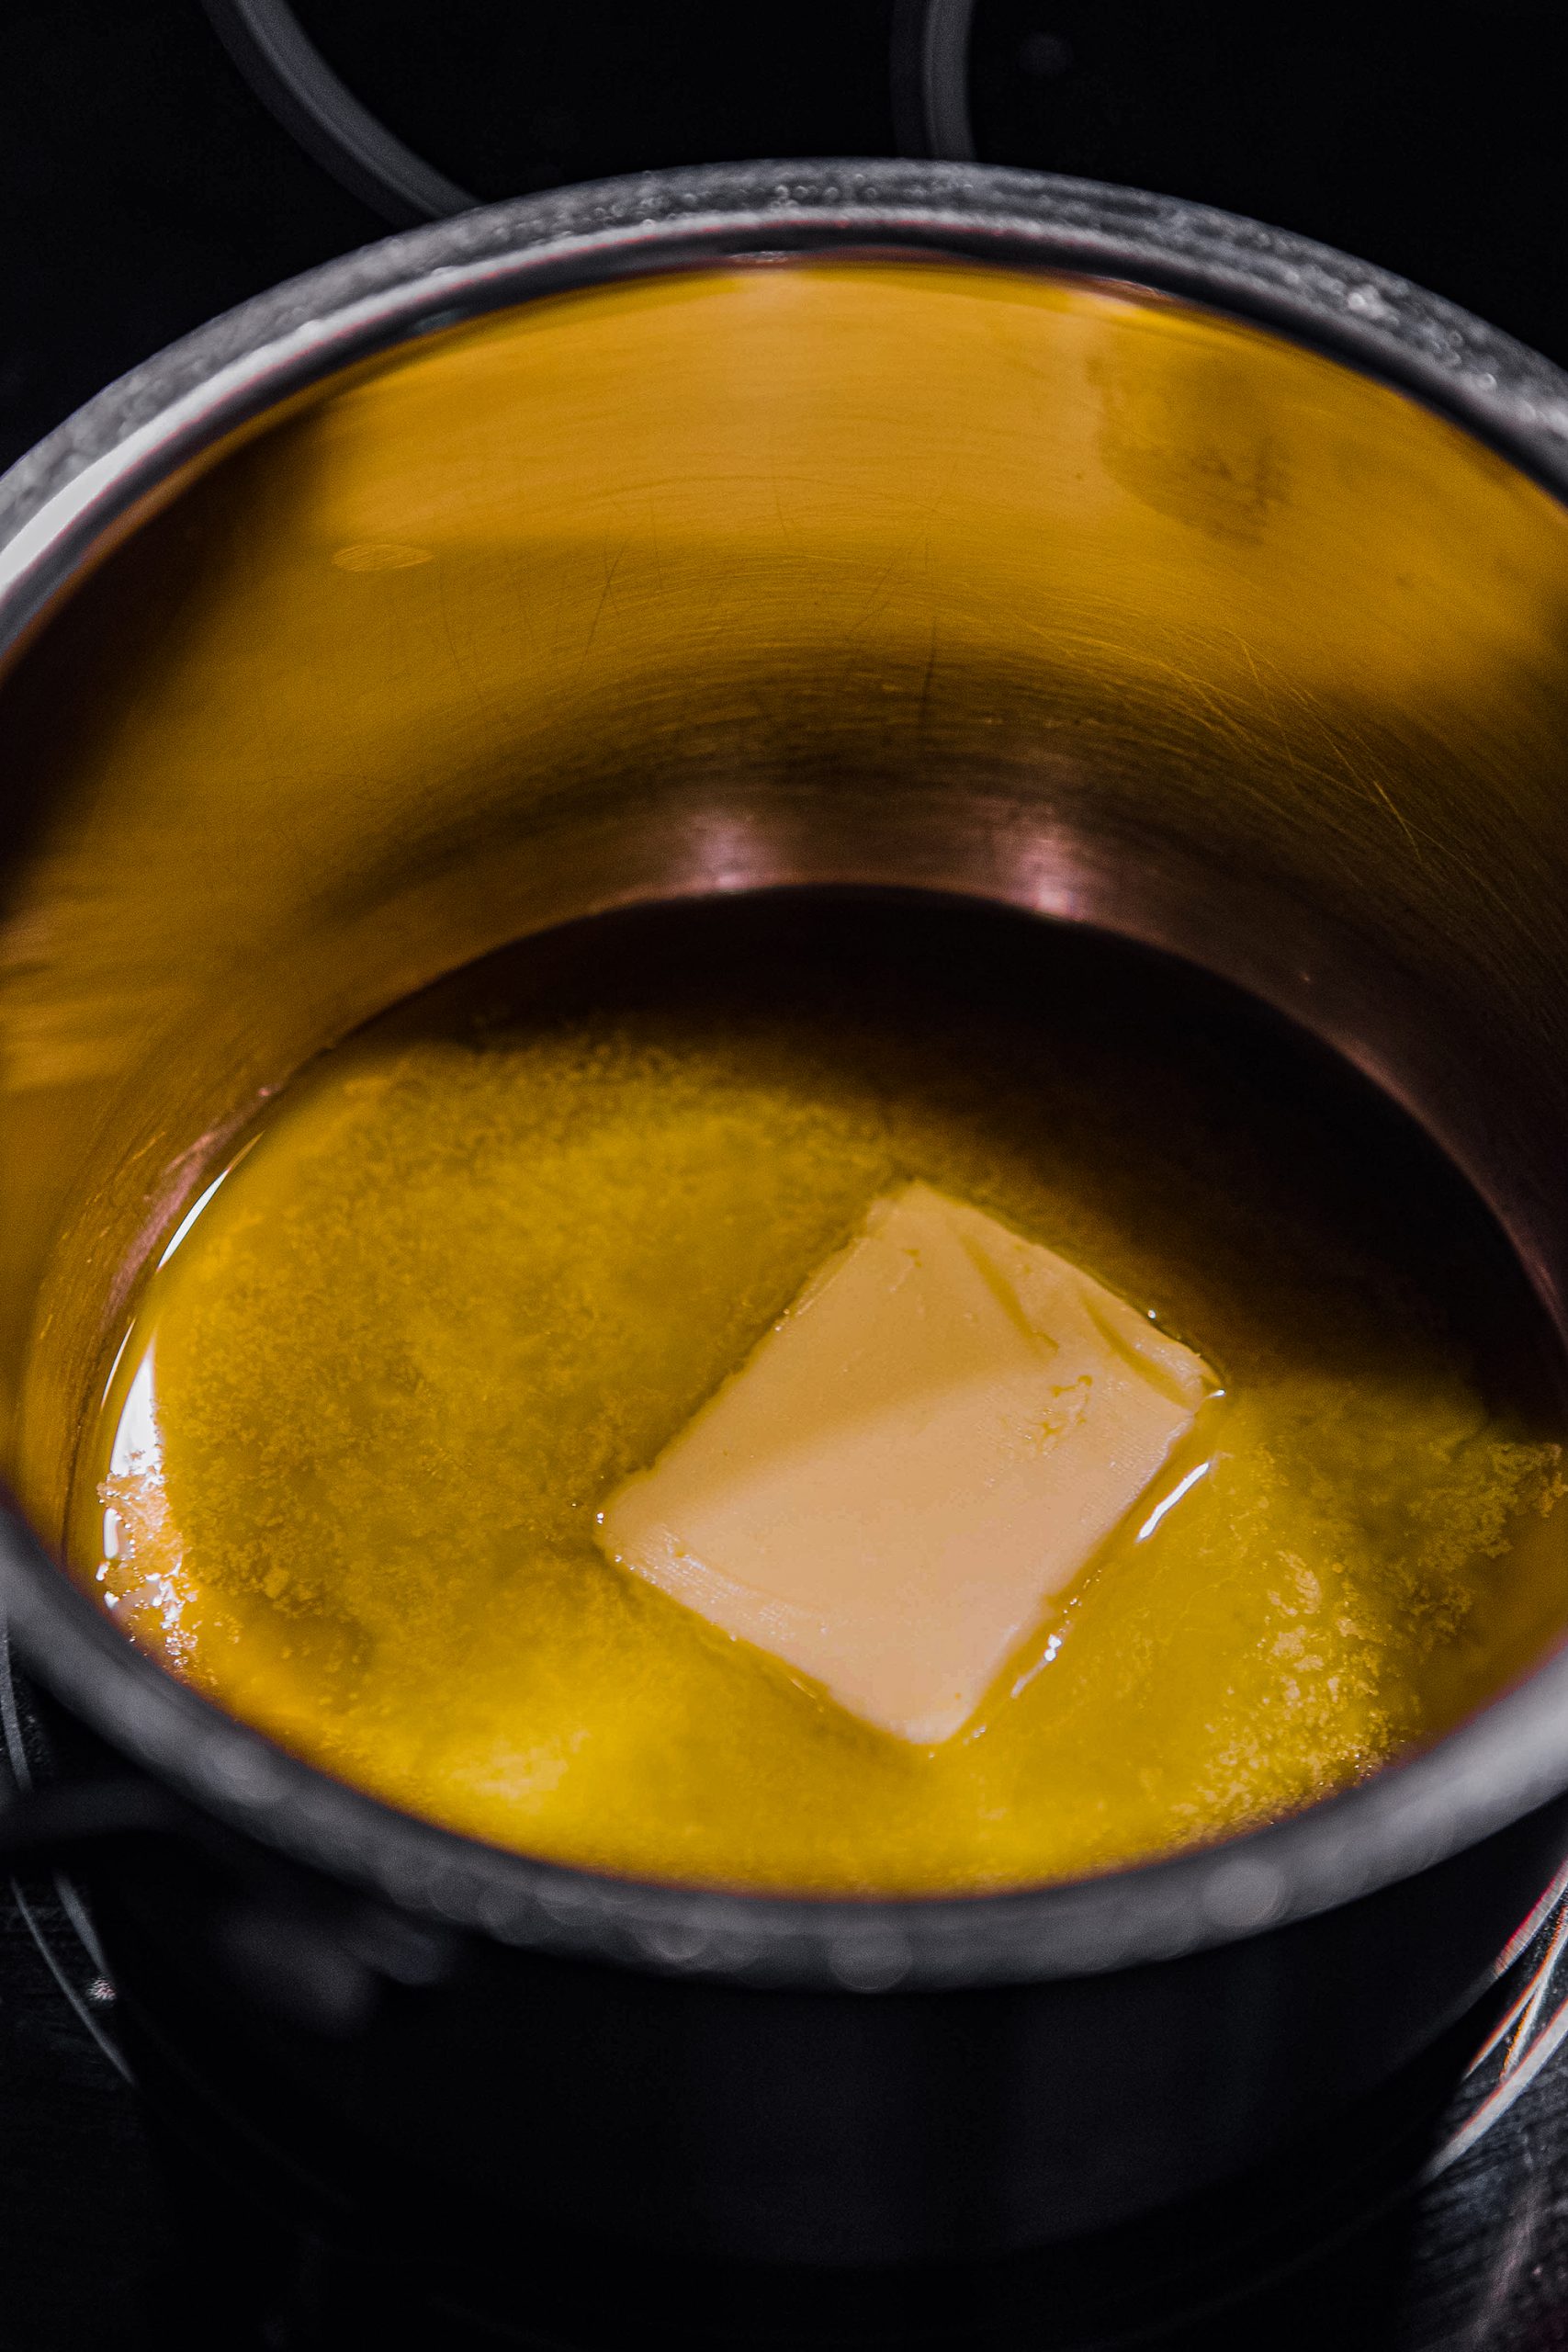 Over medium heat, melt 4 tablespoons of butter in a saucepan. Add the cream and simmer for 4-5 minutes, until just thickened. 